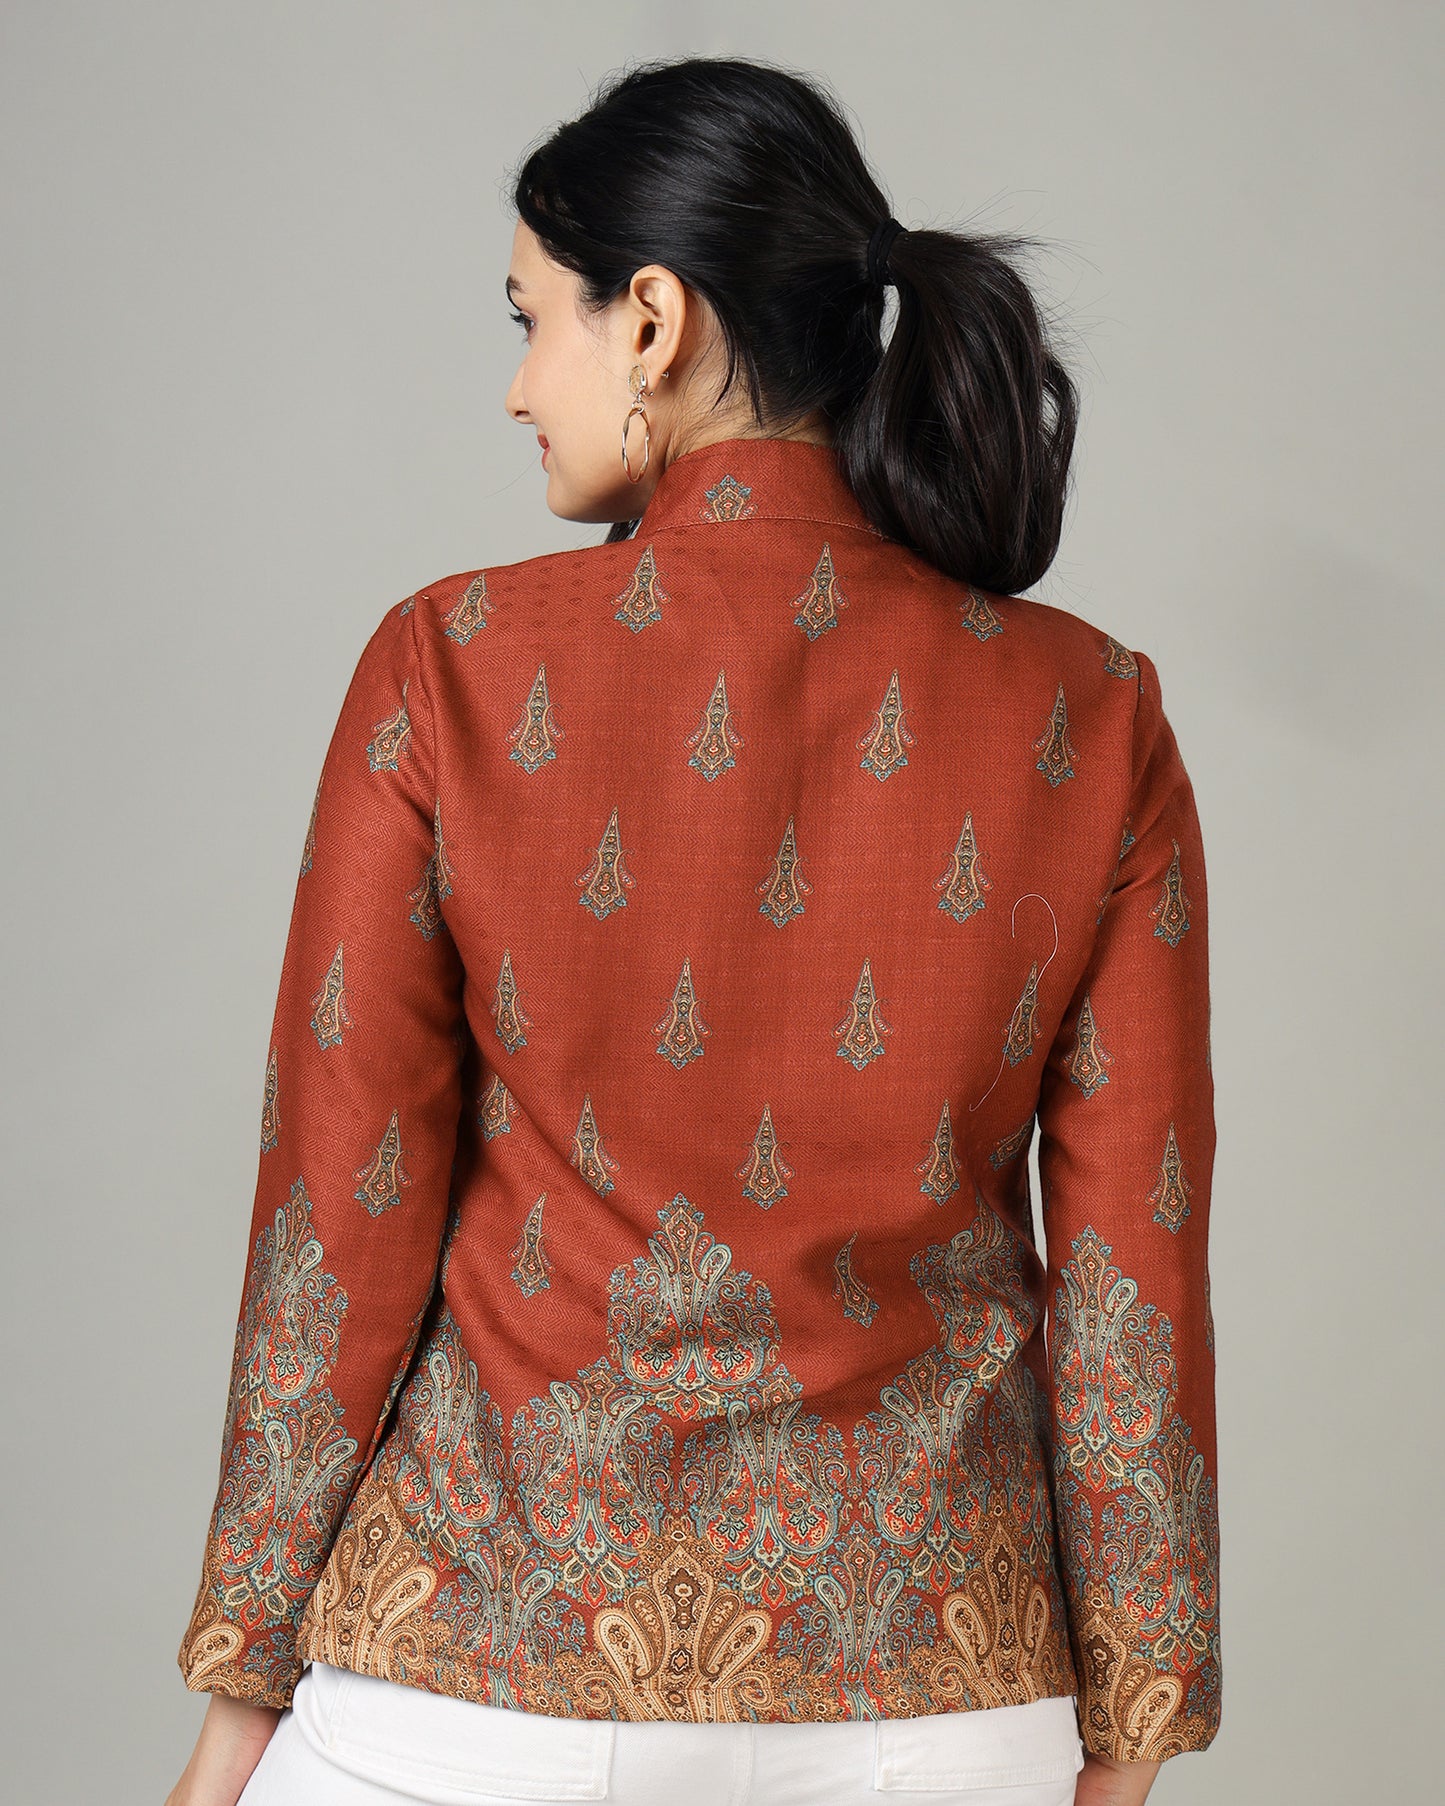 Cultural Charm In Every Stitch: Women's Ethnic Jacket